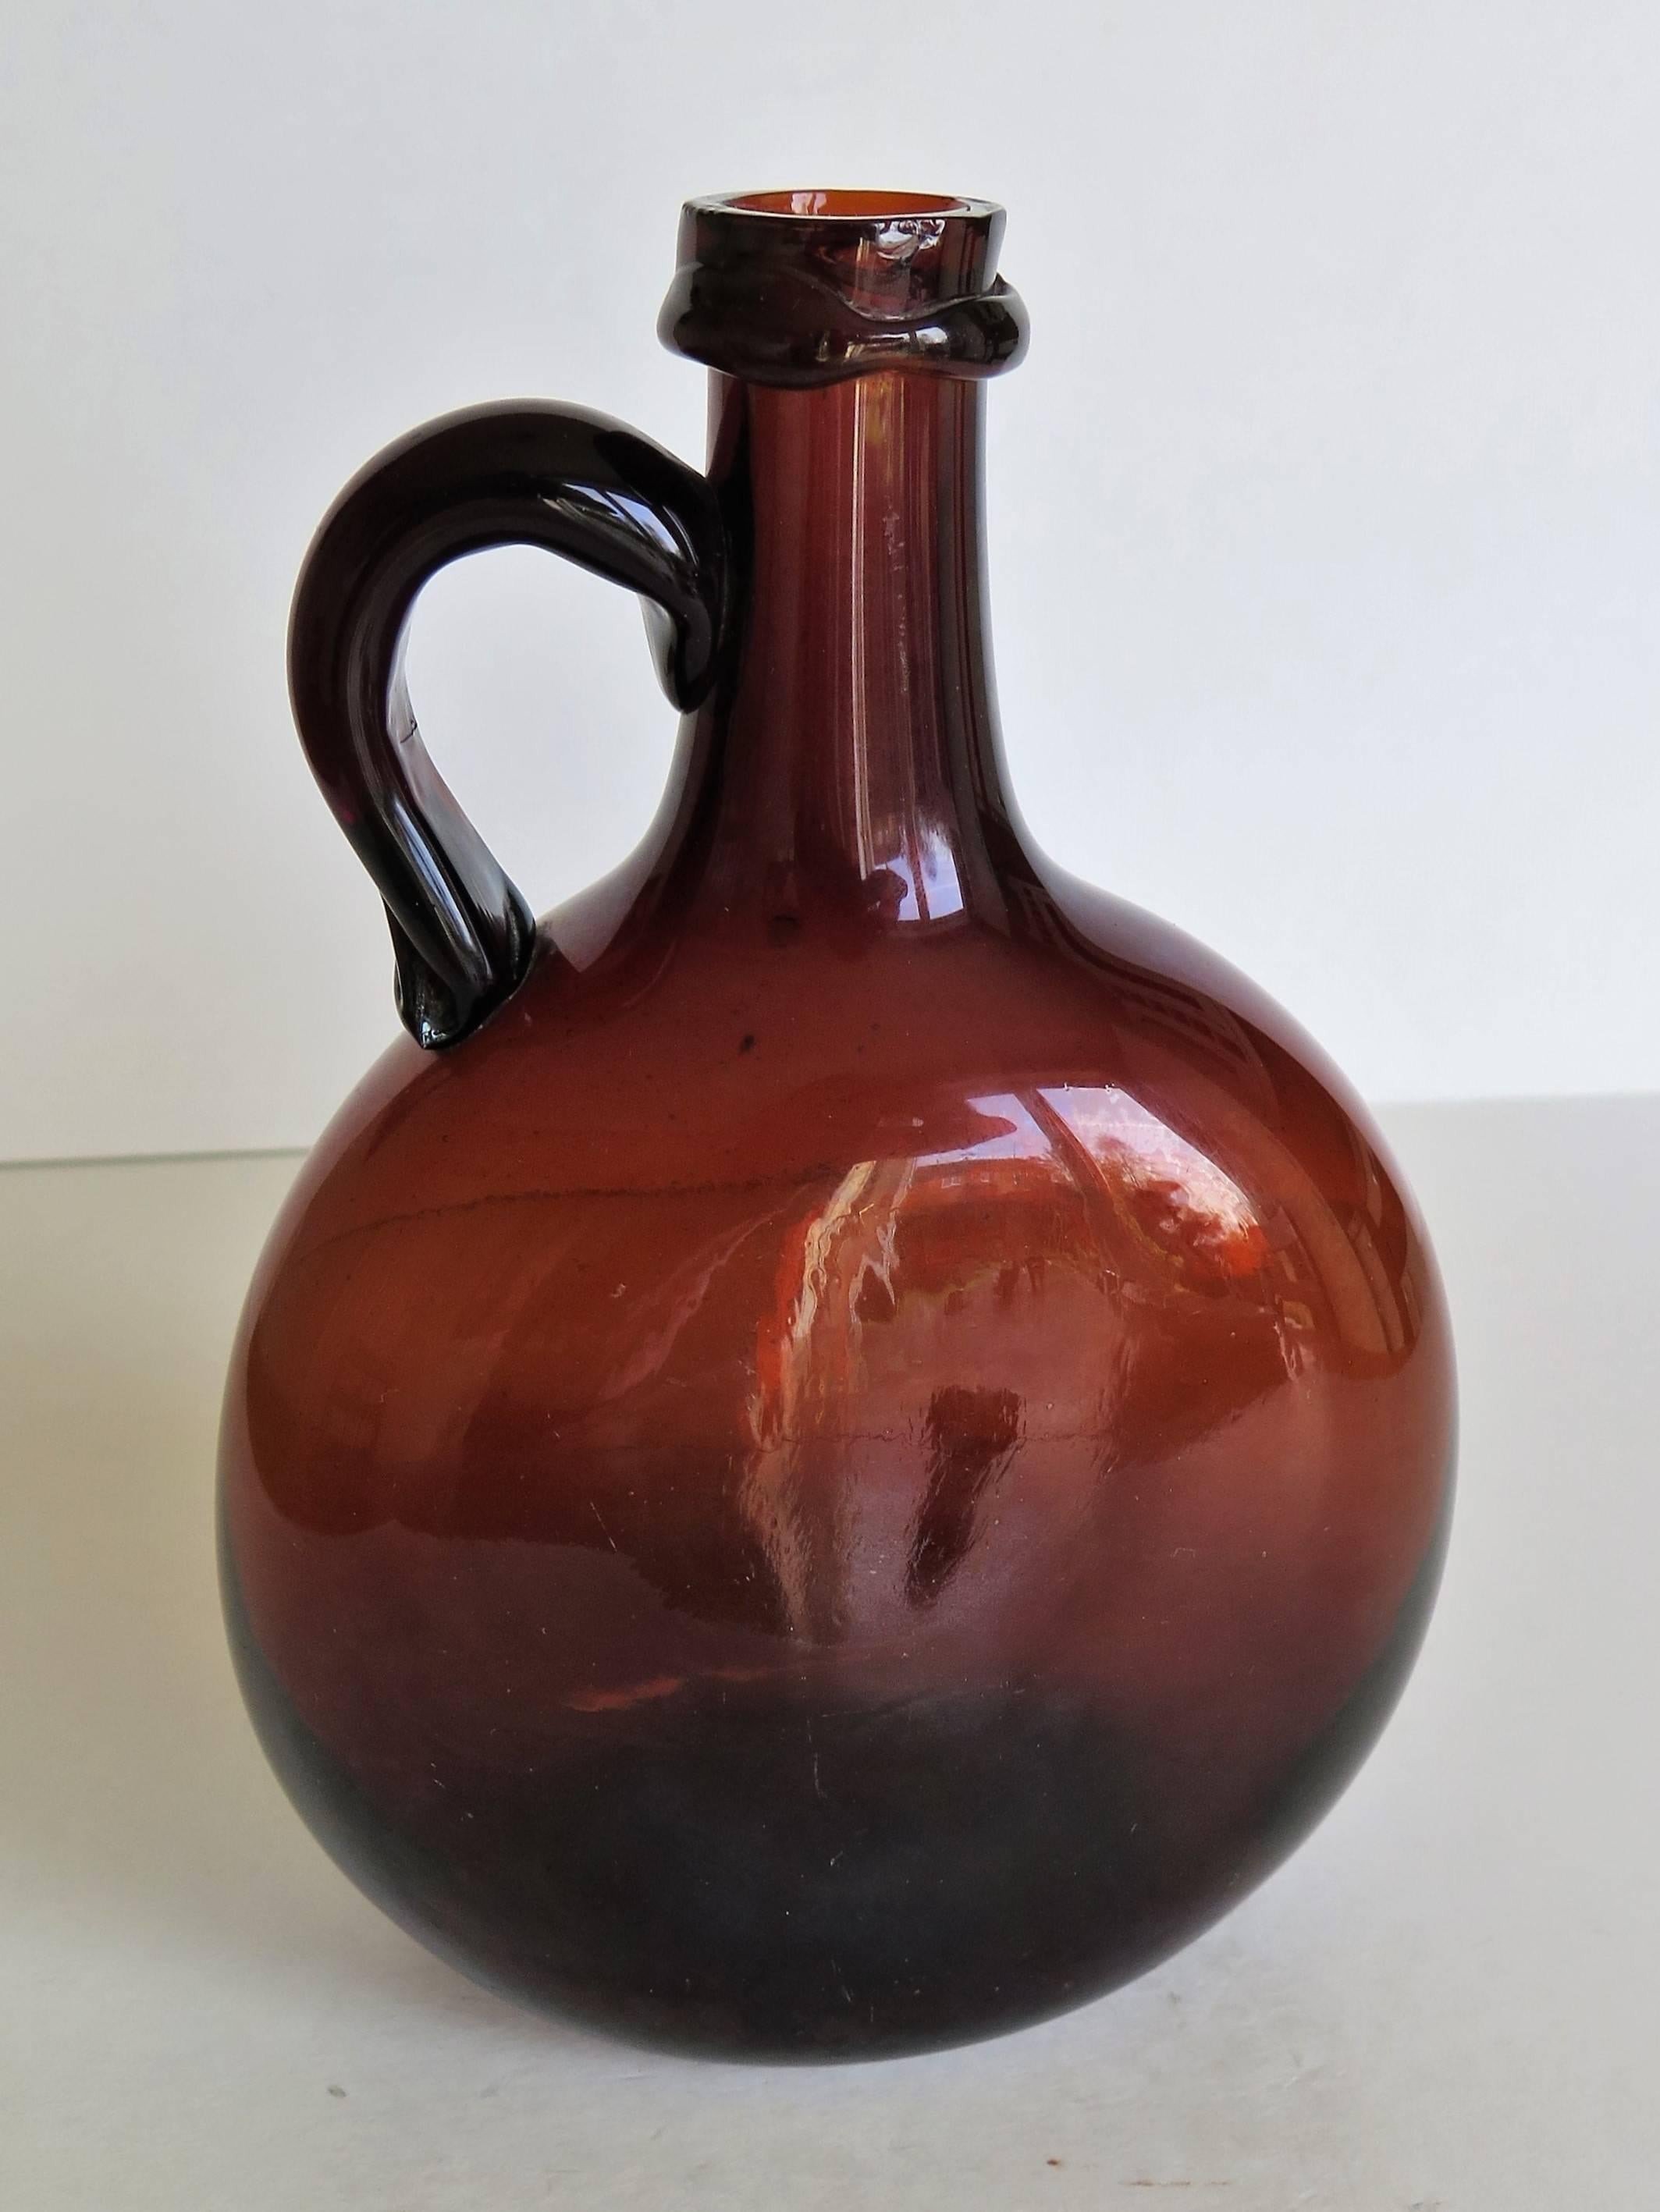 English Amber Glass Flagon or Jug with Cork and Metal Stopper Handblown, Ca 1825